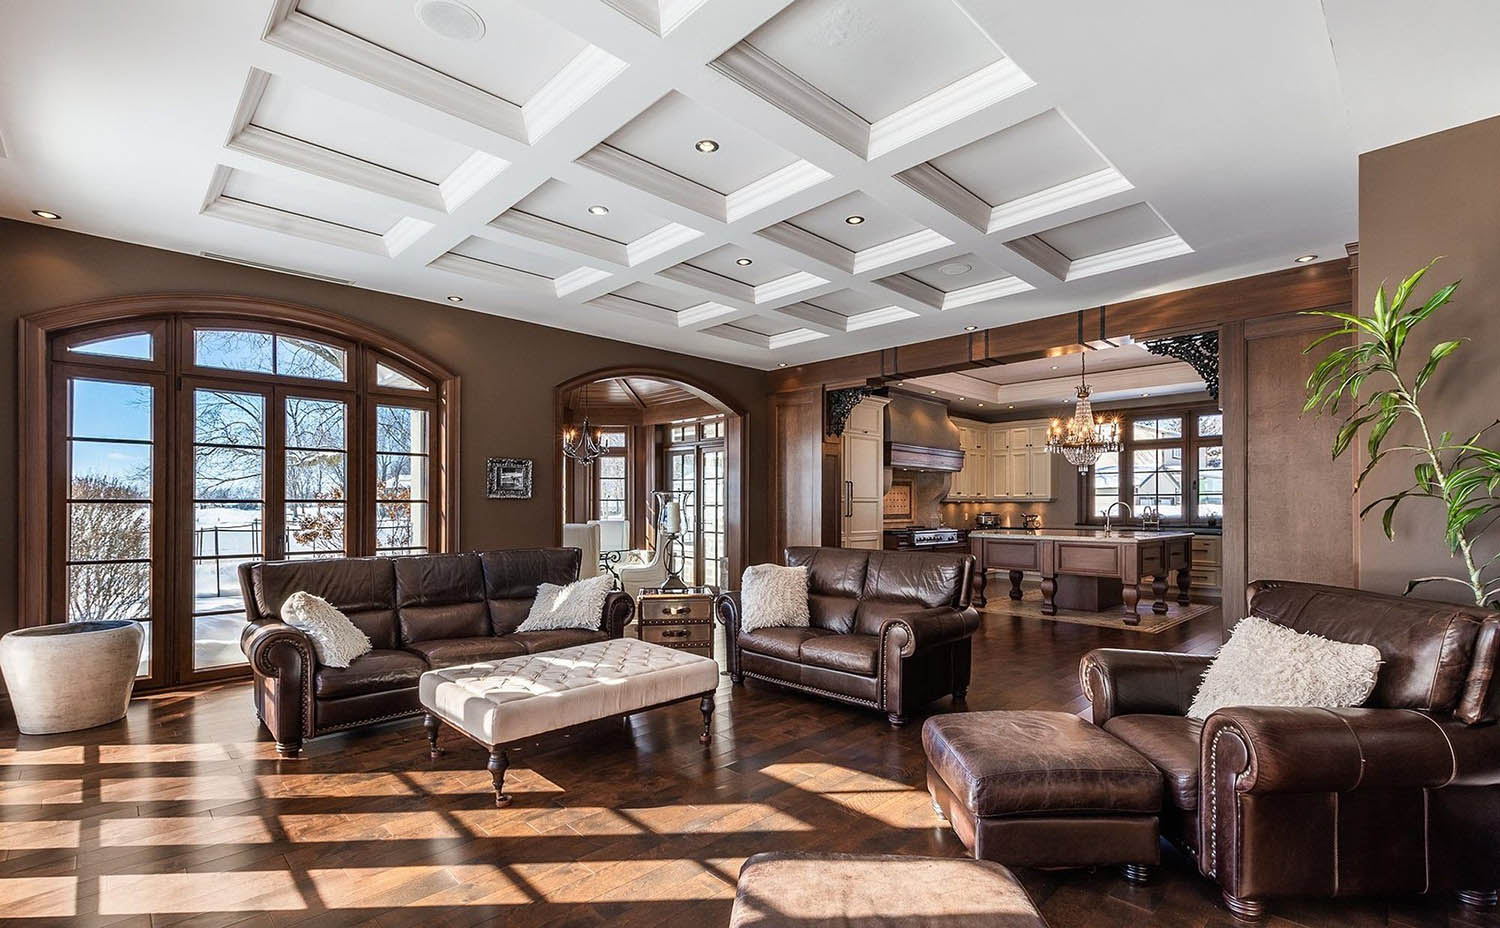 Beautiful living room with all white coffered ceiling recessed into the ceiling with soffits. Recessed LED lighting. Brown walls with brown stained trim.